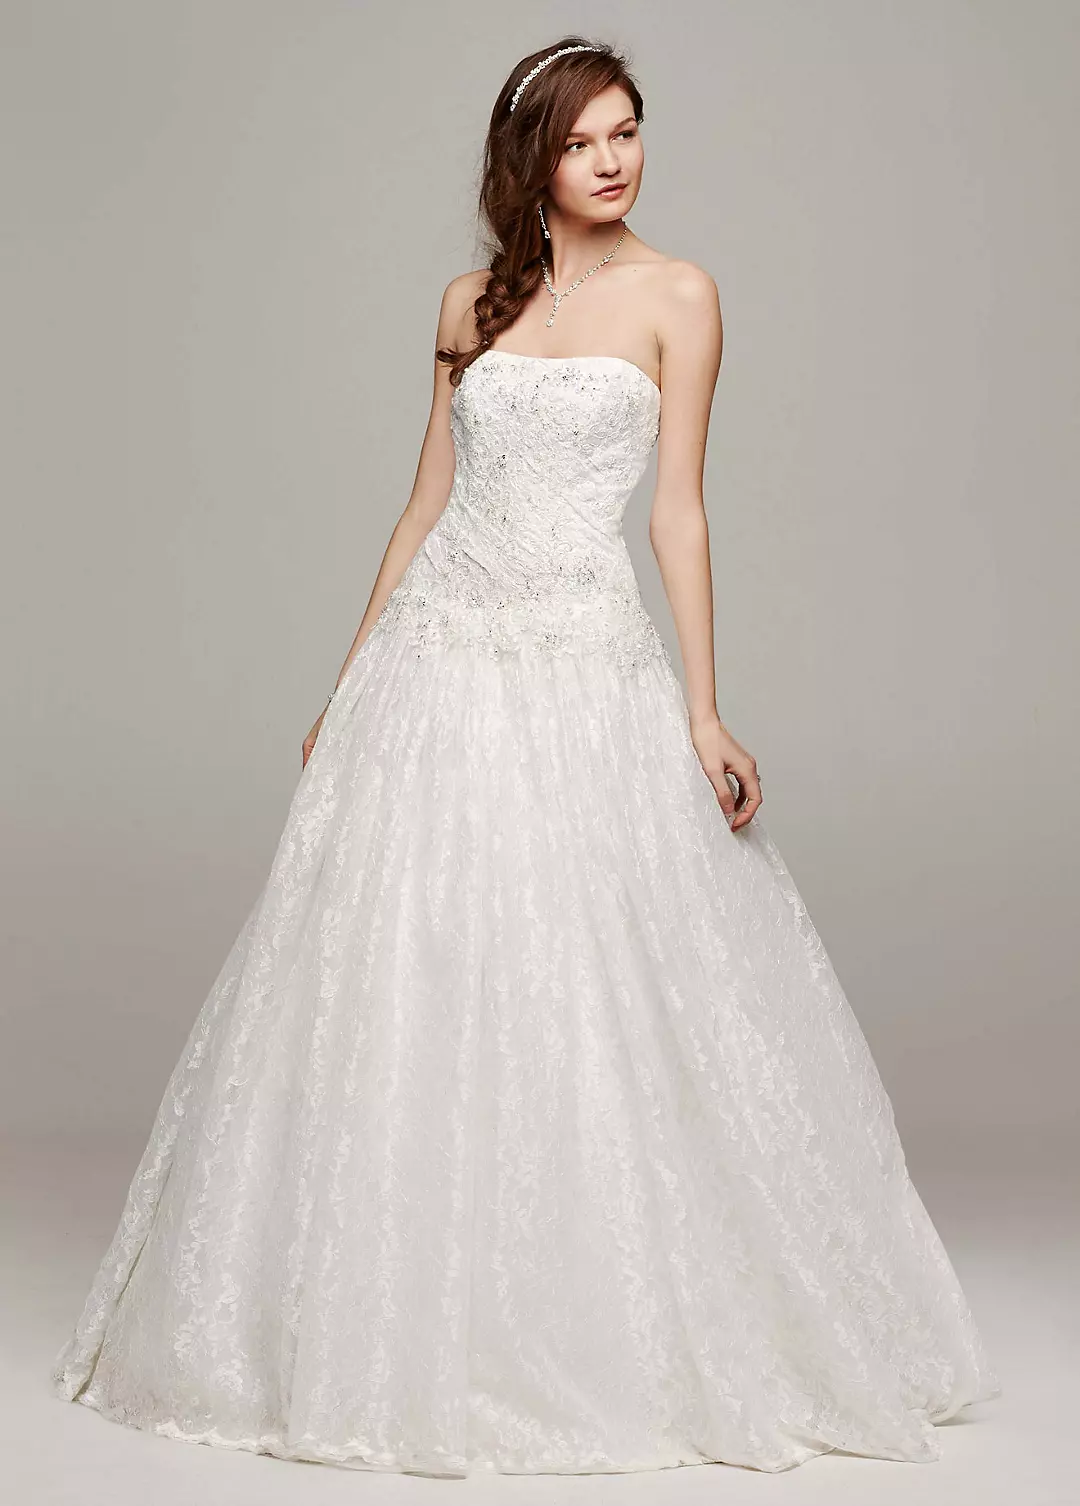 Strapless All Over Beaded Lace Wedding Dress Image